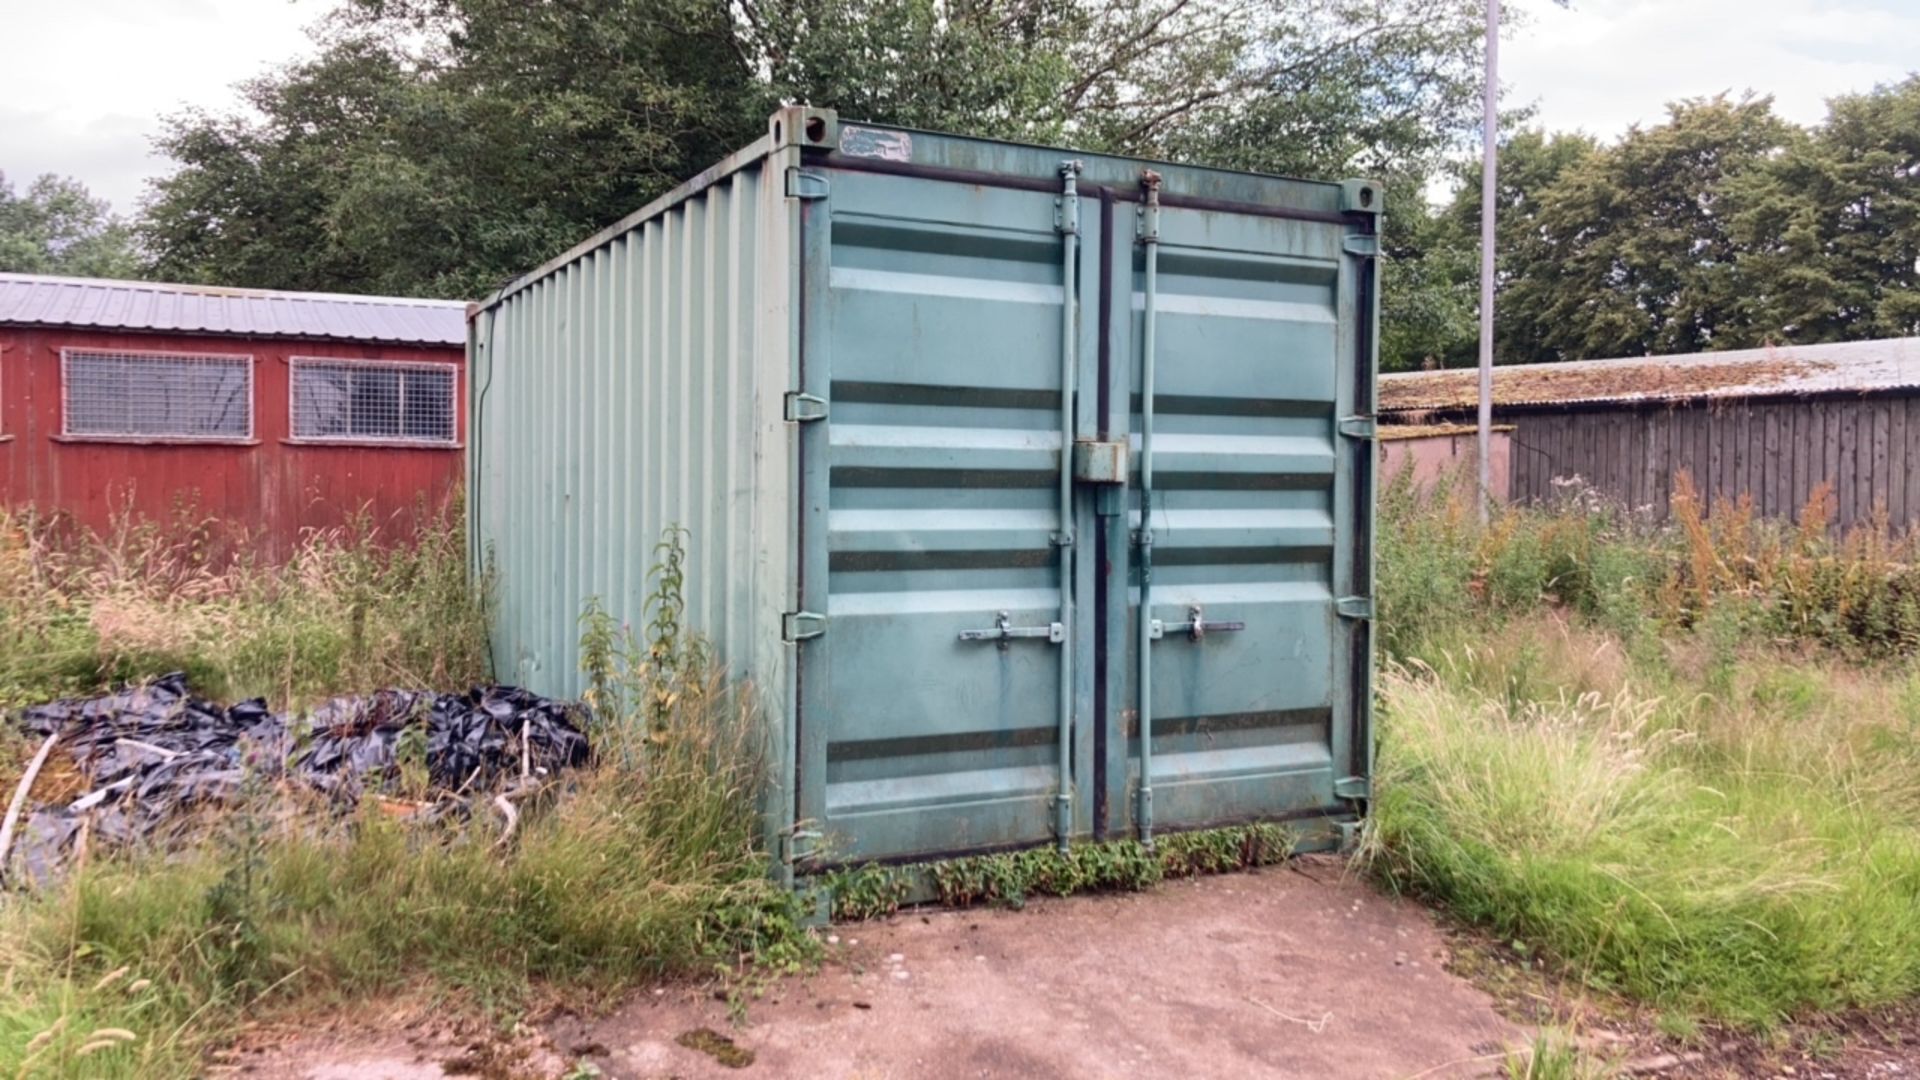 Shipping Container And Sports Equipment - Bild 14 aus 14